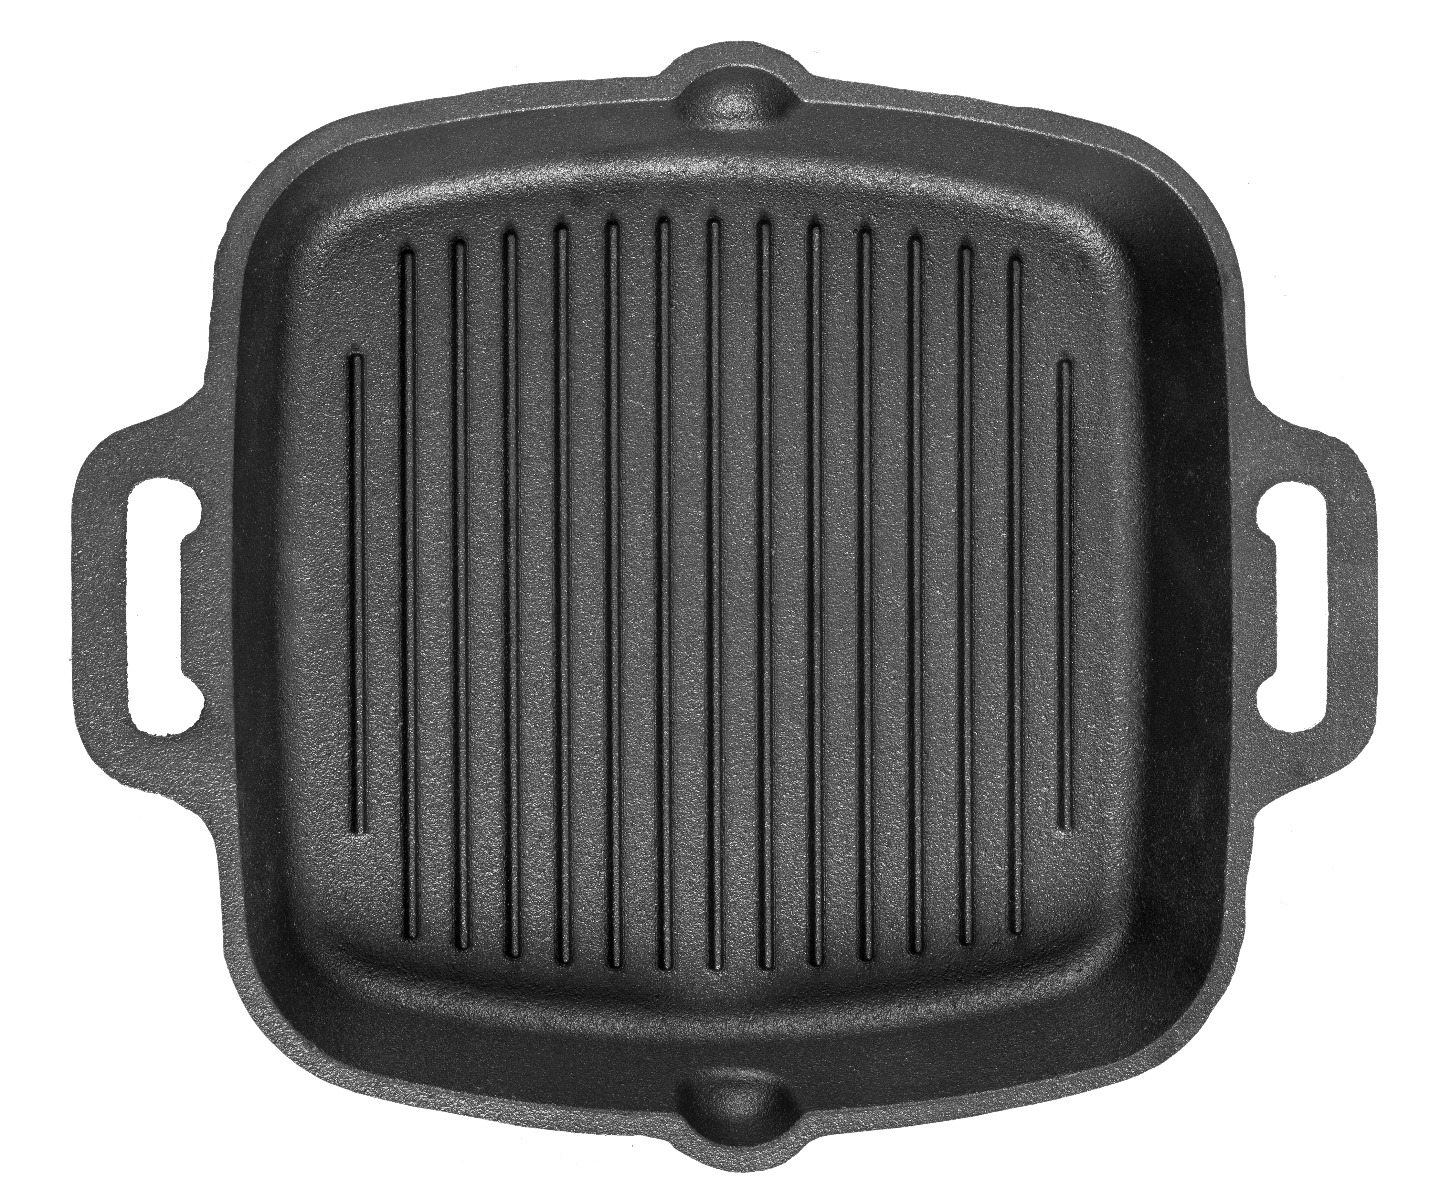 Natural Pre-Seasoned Cast Iron Double Handle Grill Pan 10.25 Inch, 0.5 L Capacity, Black